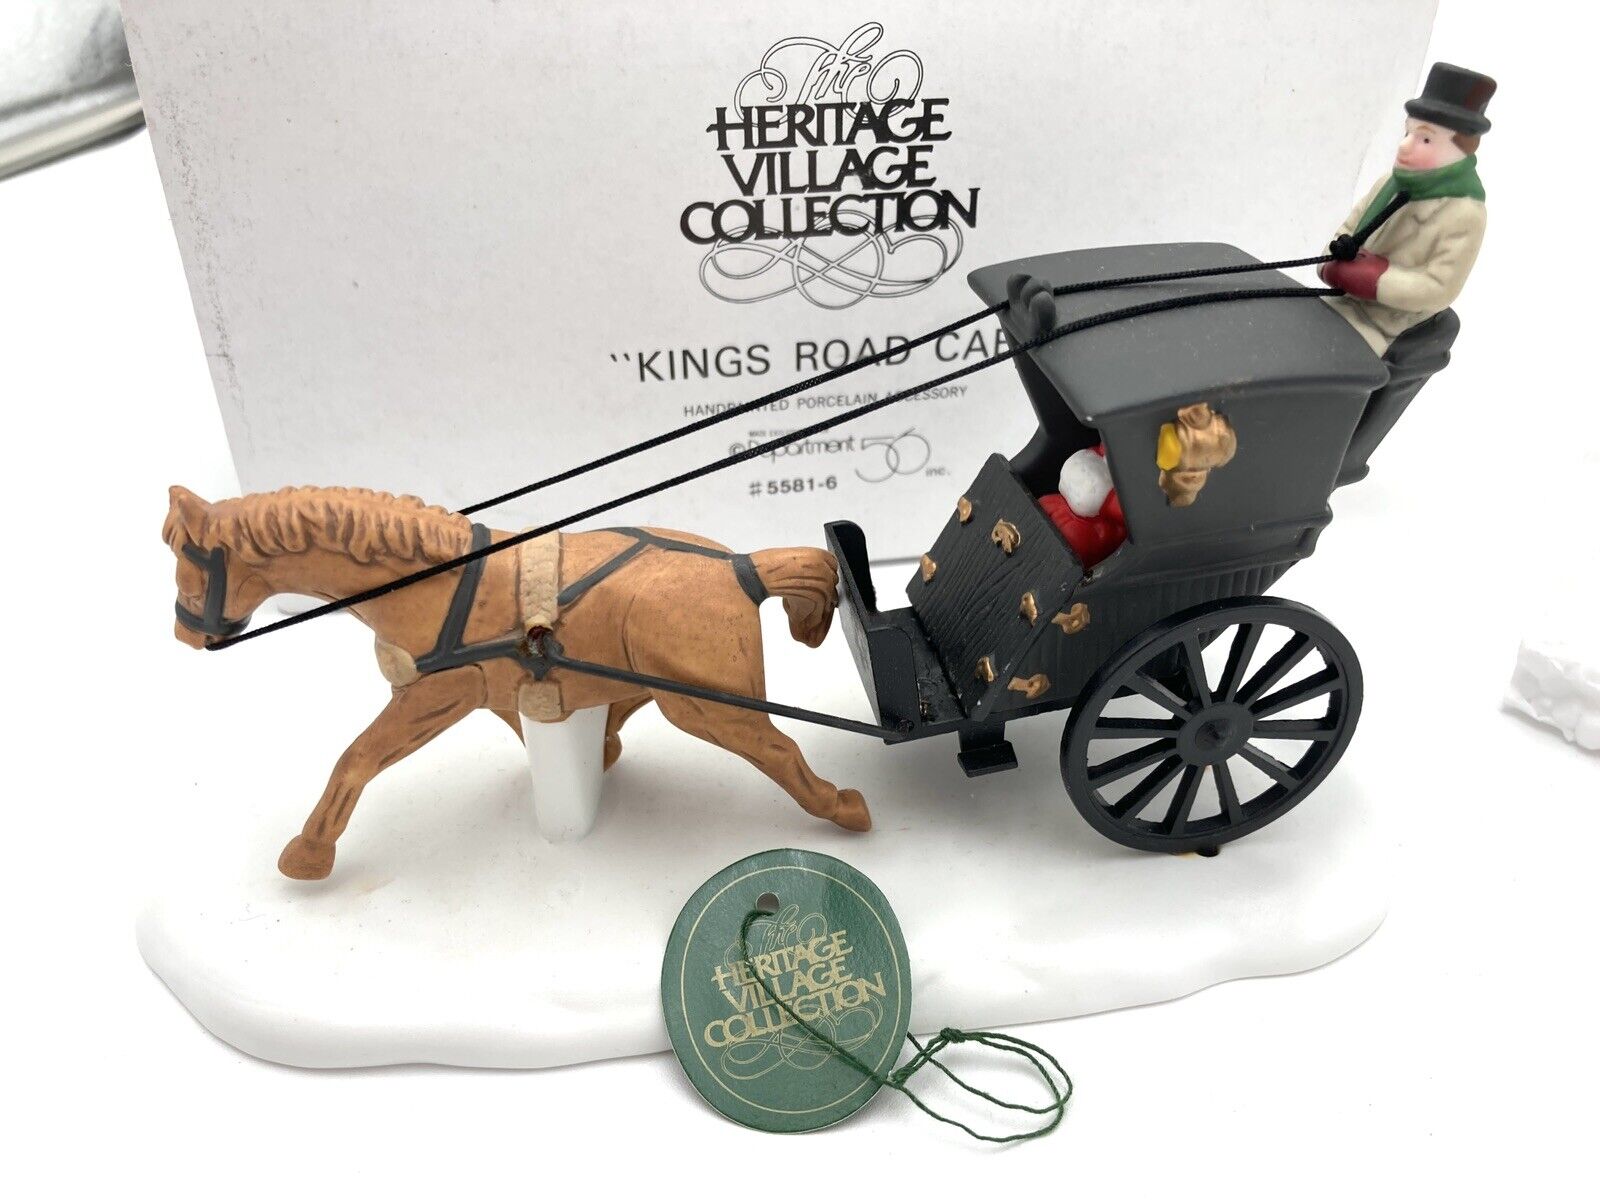 DEPT 56 KINGS ROAD CAB The Heritage Village Collection RETIRED Dickens 5581-6